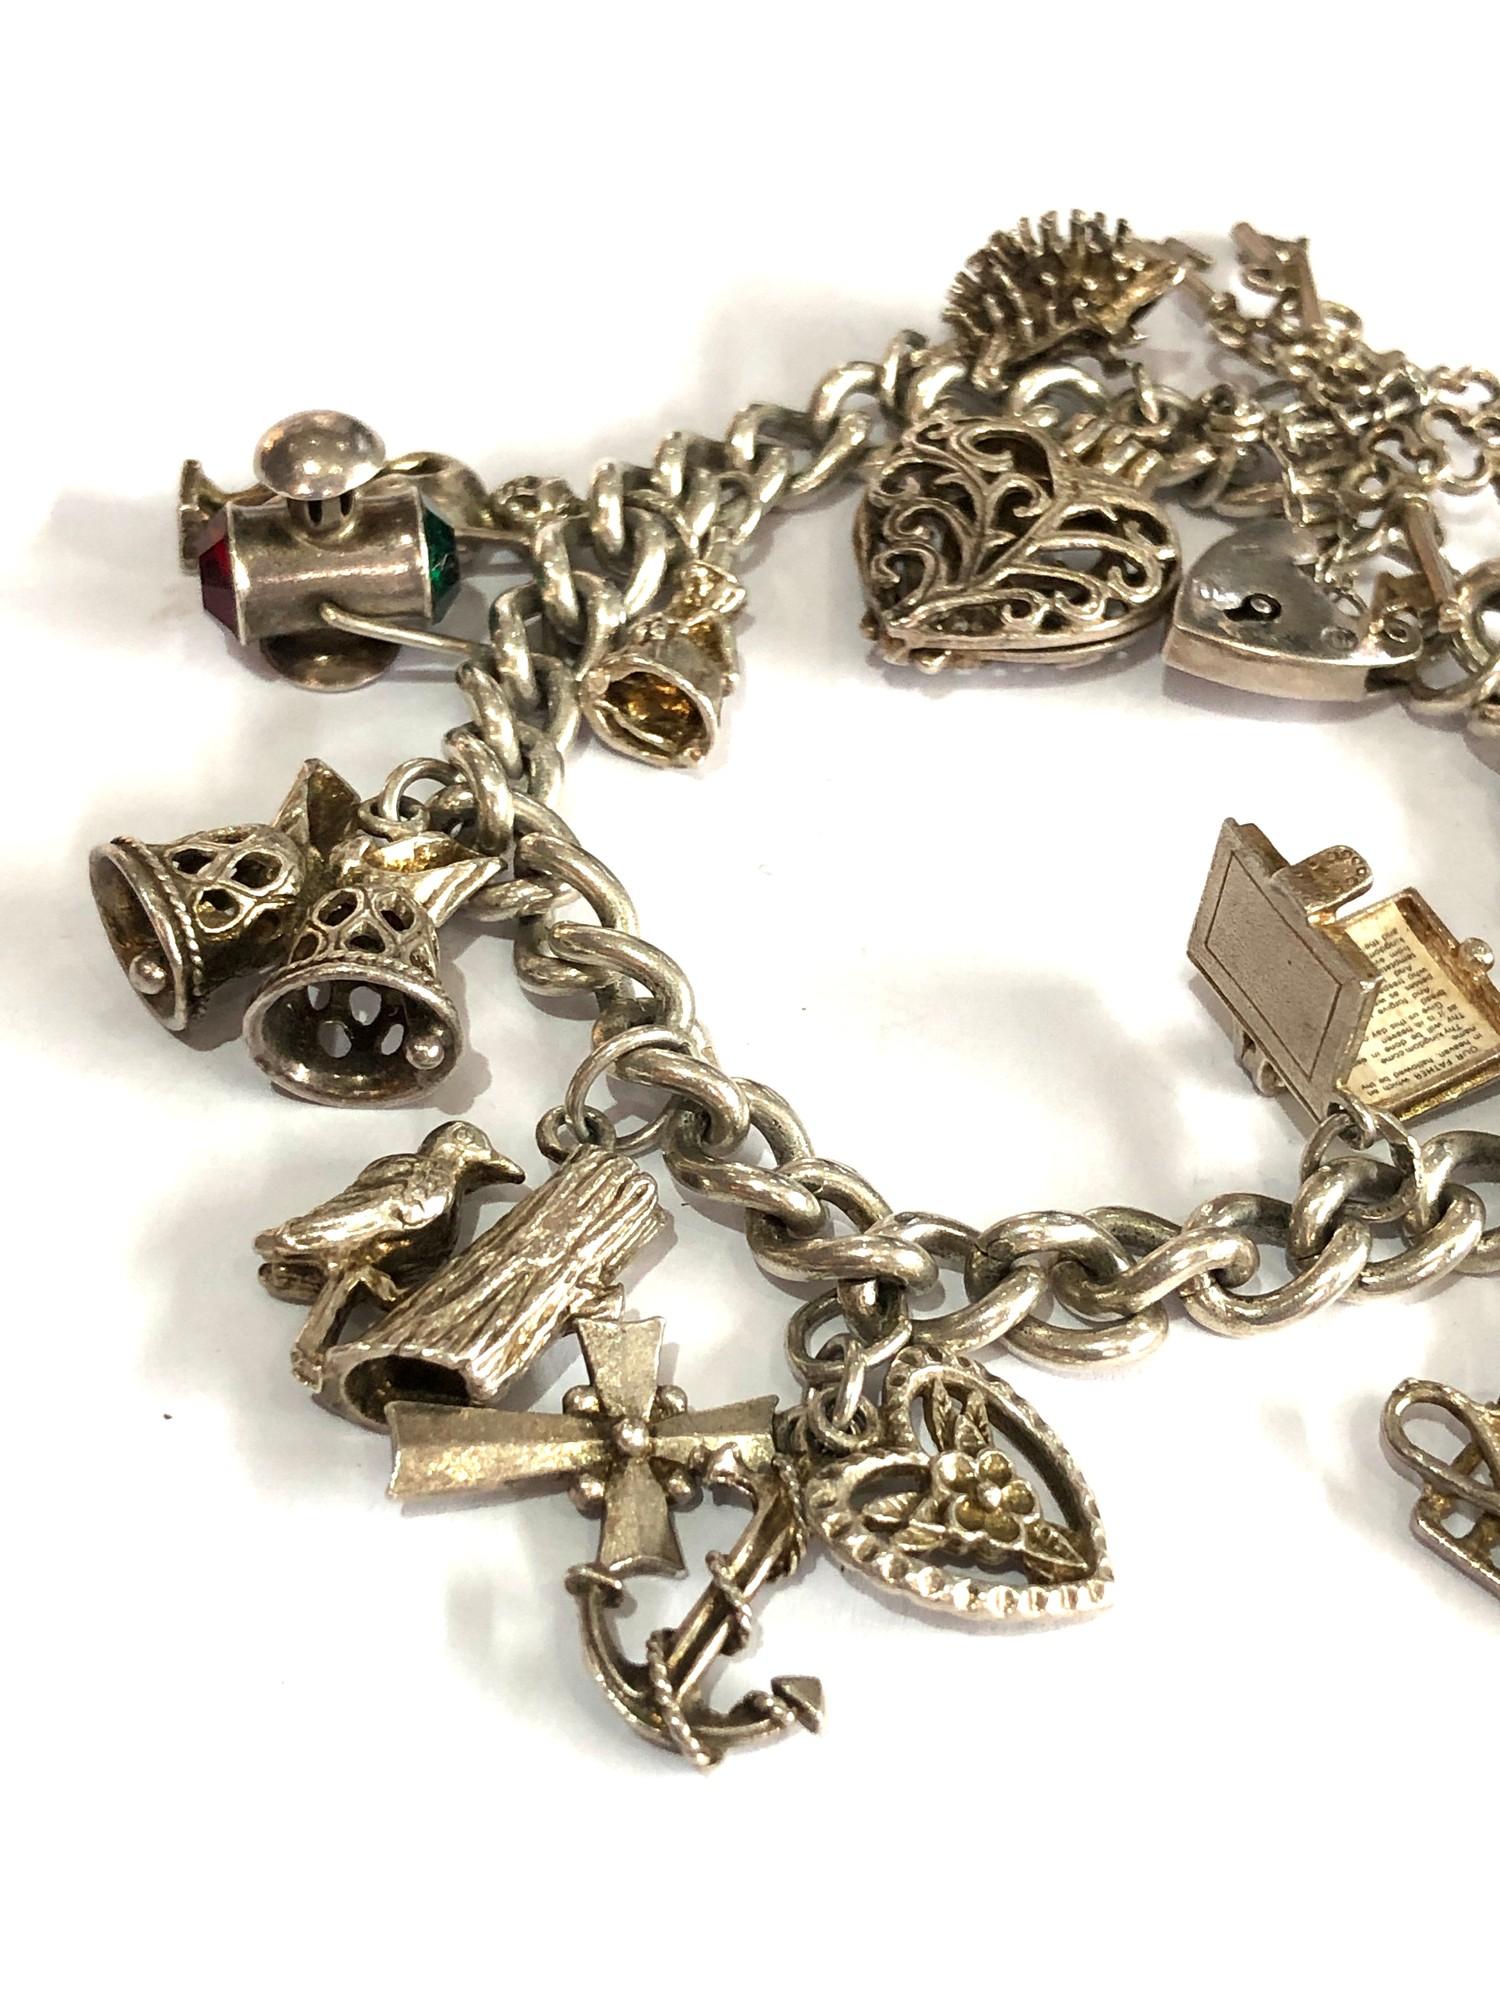 Silver charm bracelet weight 53g - Image 3 of 3